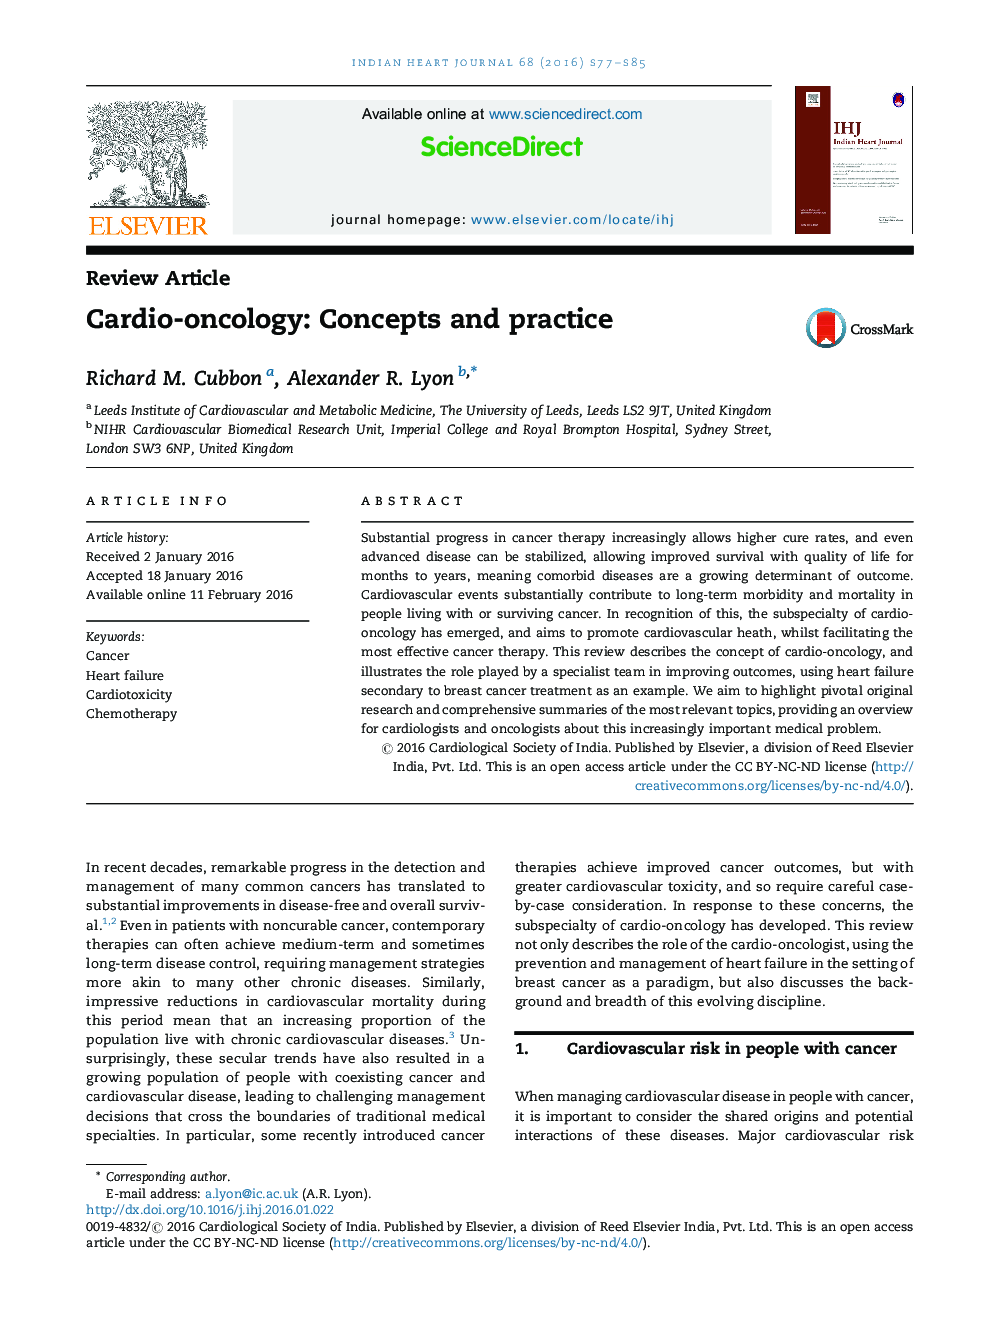 Cardio-oncology: Concepts and practice